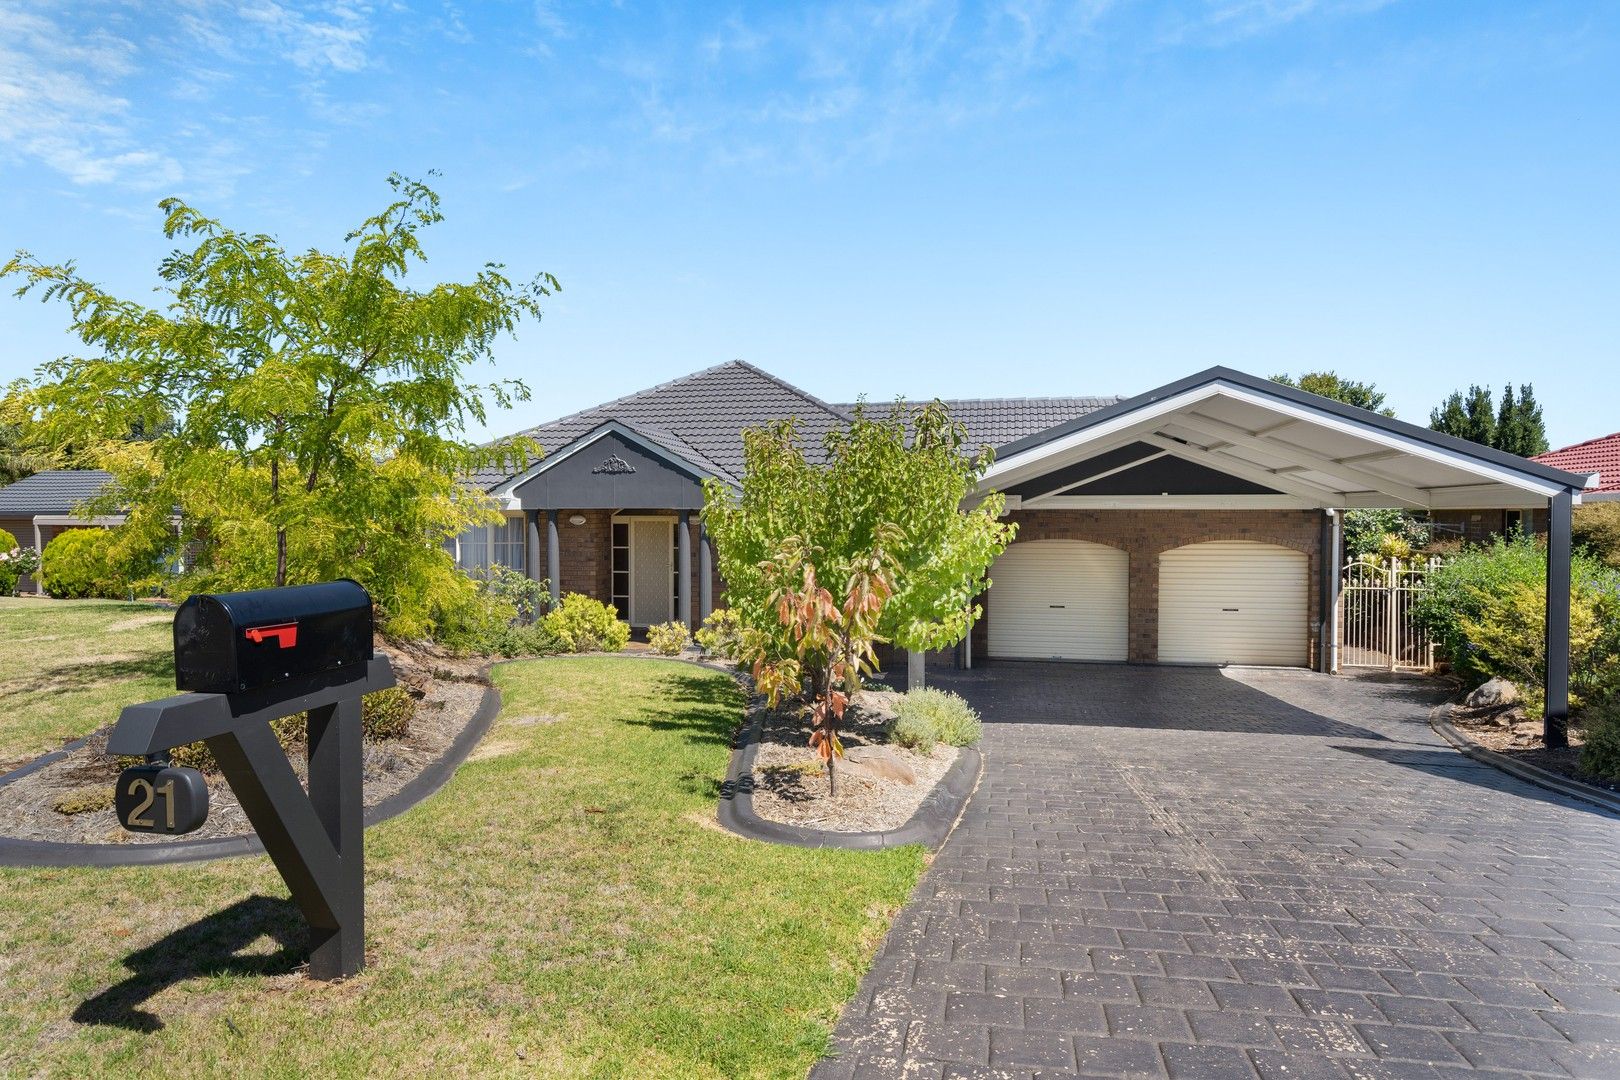 4 bedrooms House in 21 Lapwing Street HALLETT COVE SA, 5158